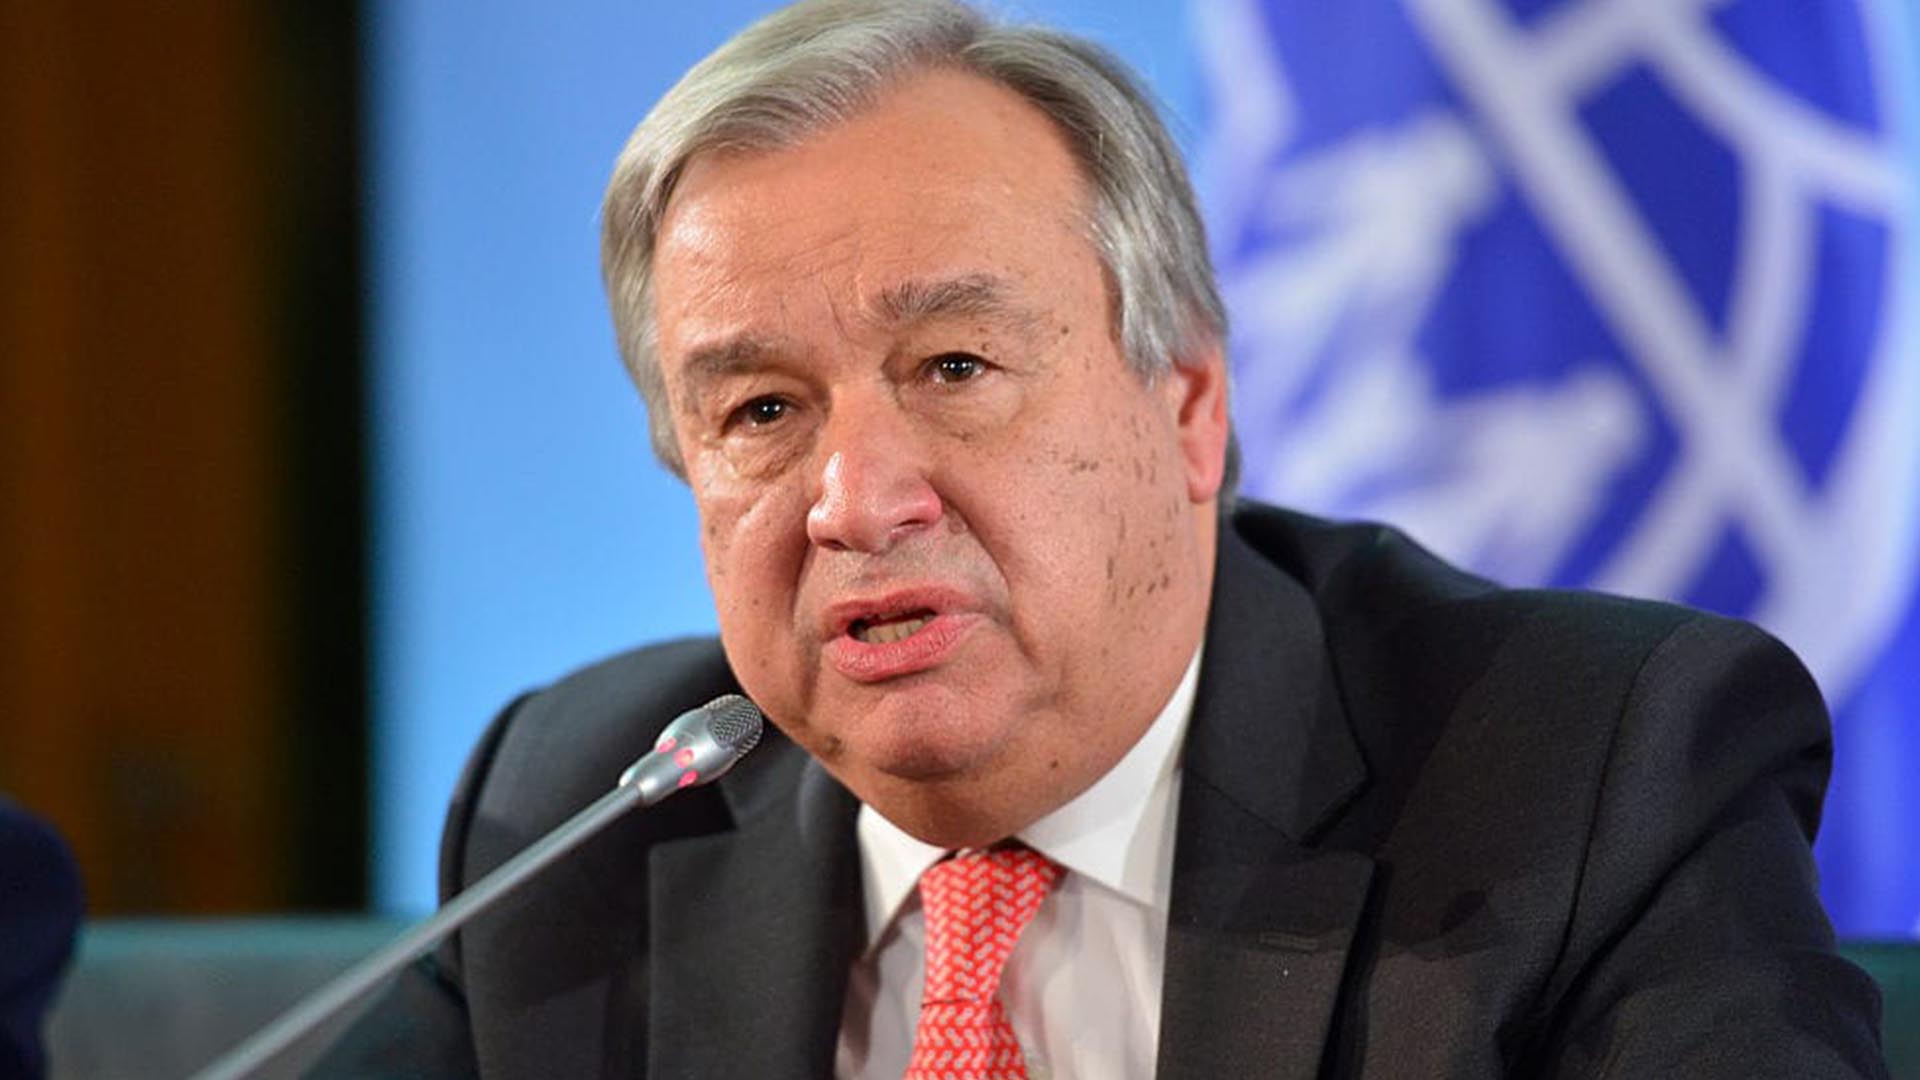 UN chief calls for destruction of chemical weapons